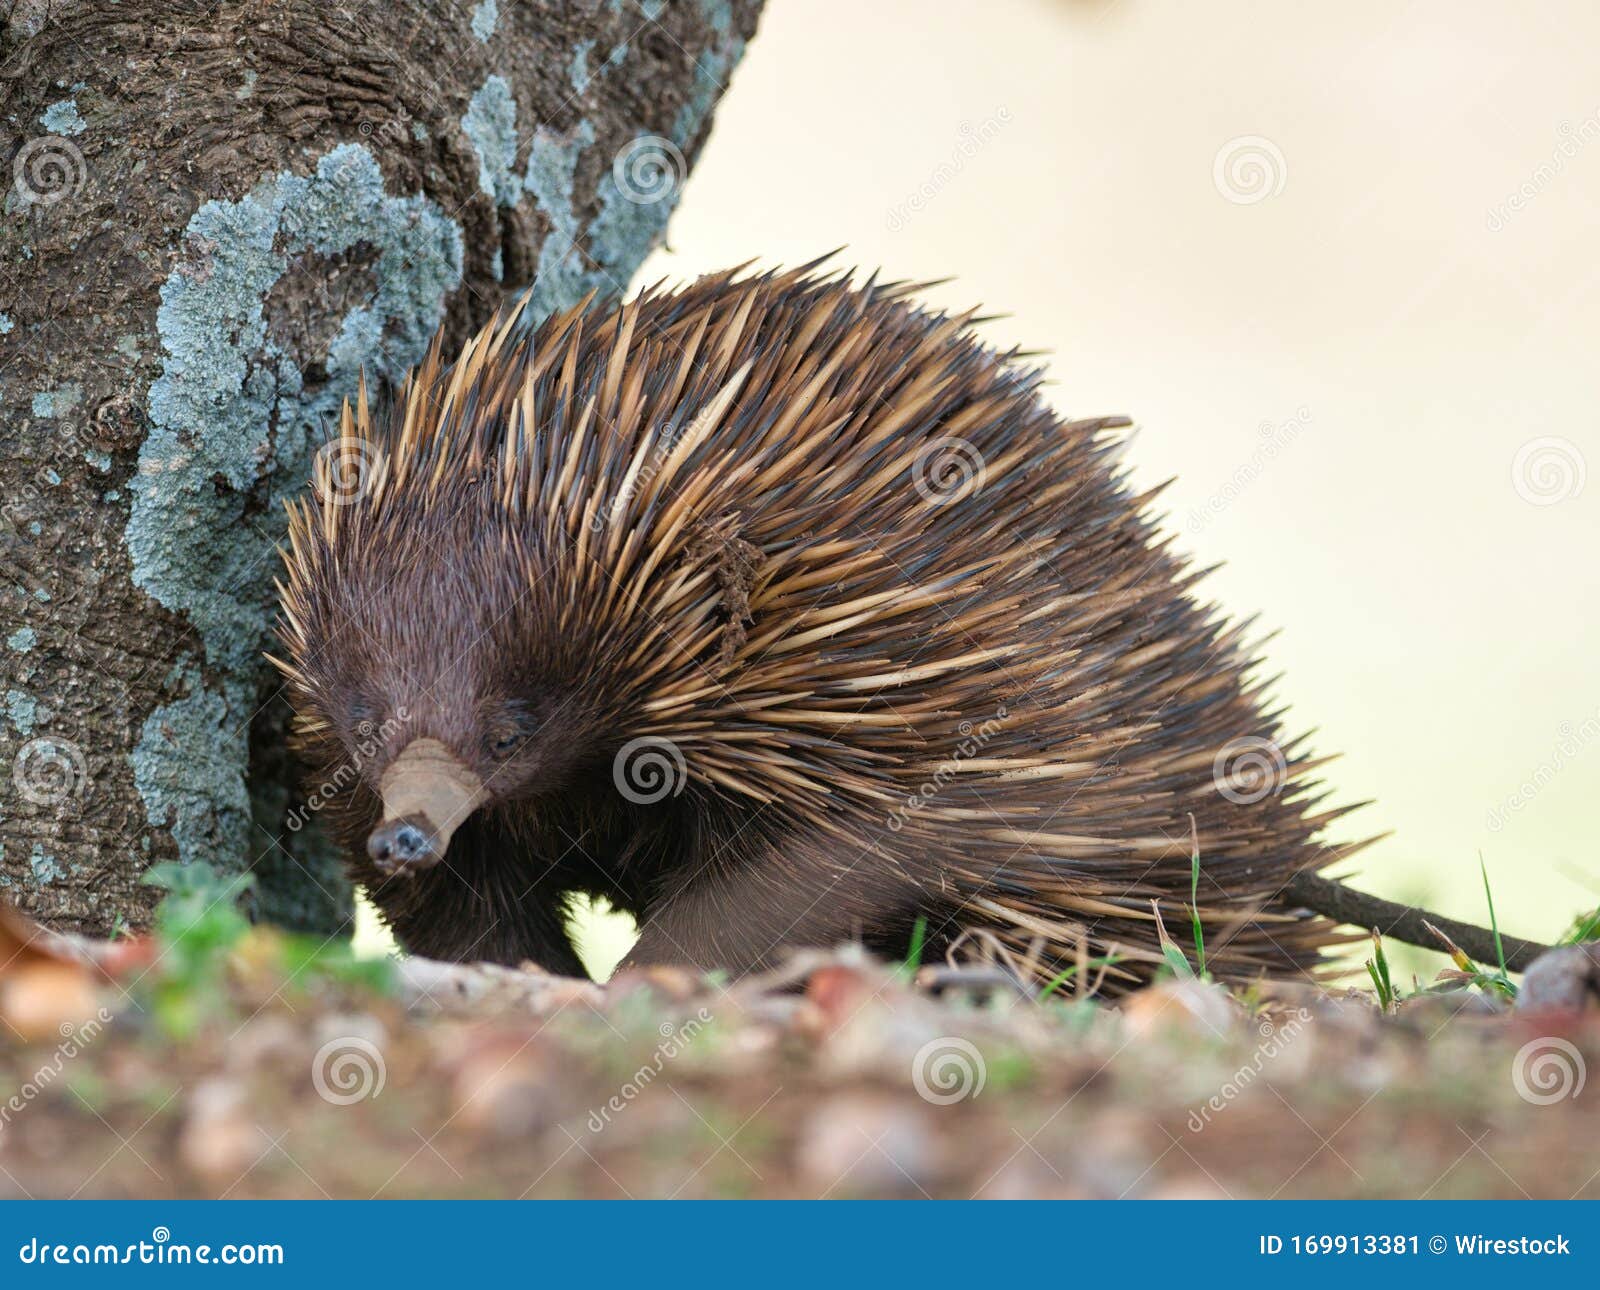  Echidna Standing  Near A Tree Surrounded By Grass Under 